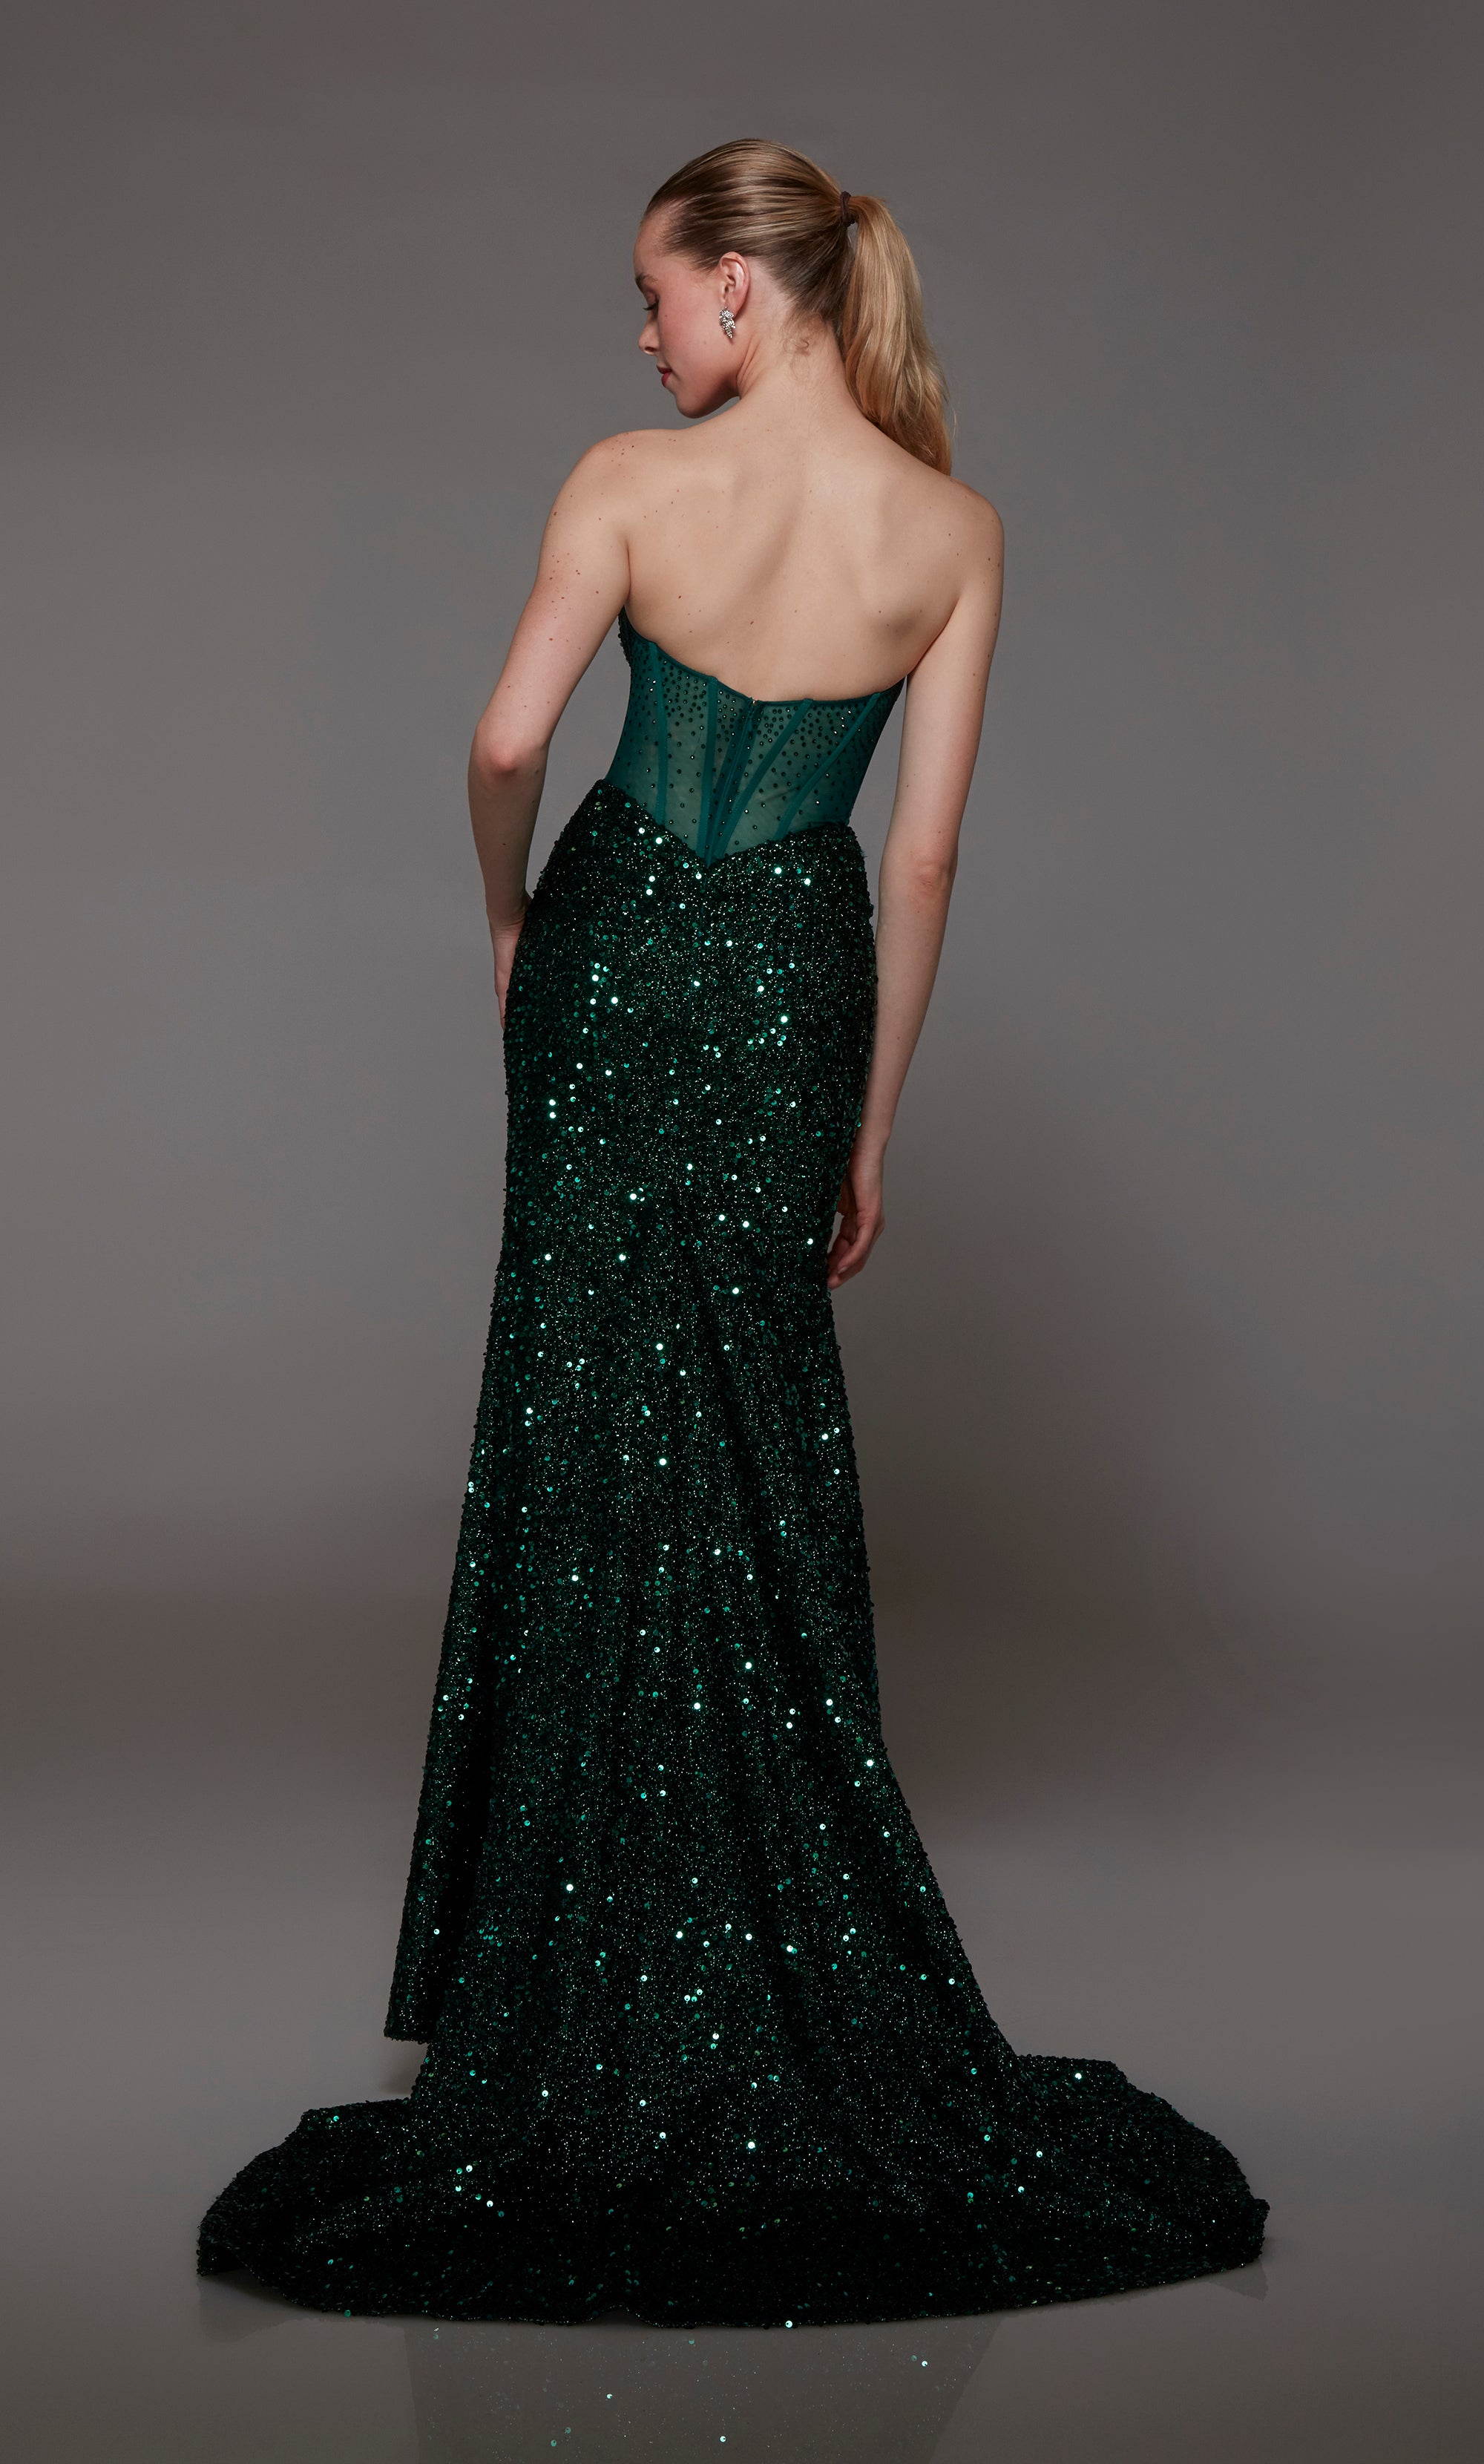 Captivating green strapless prom dress with intricate sequin detailing, corset bodice, alluring slit, and an graceful train for an red-carpet-worthy look.